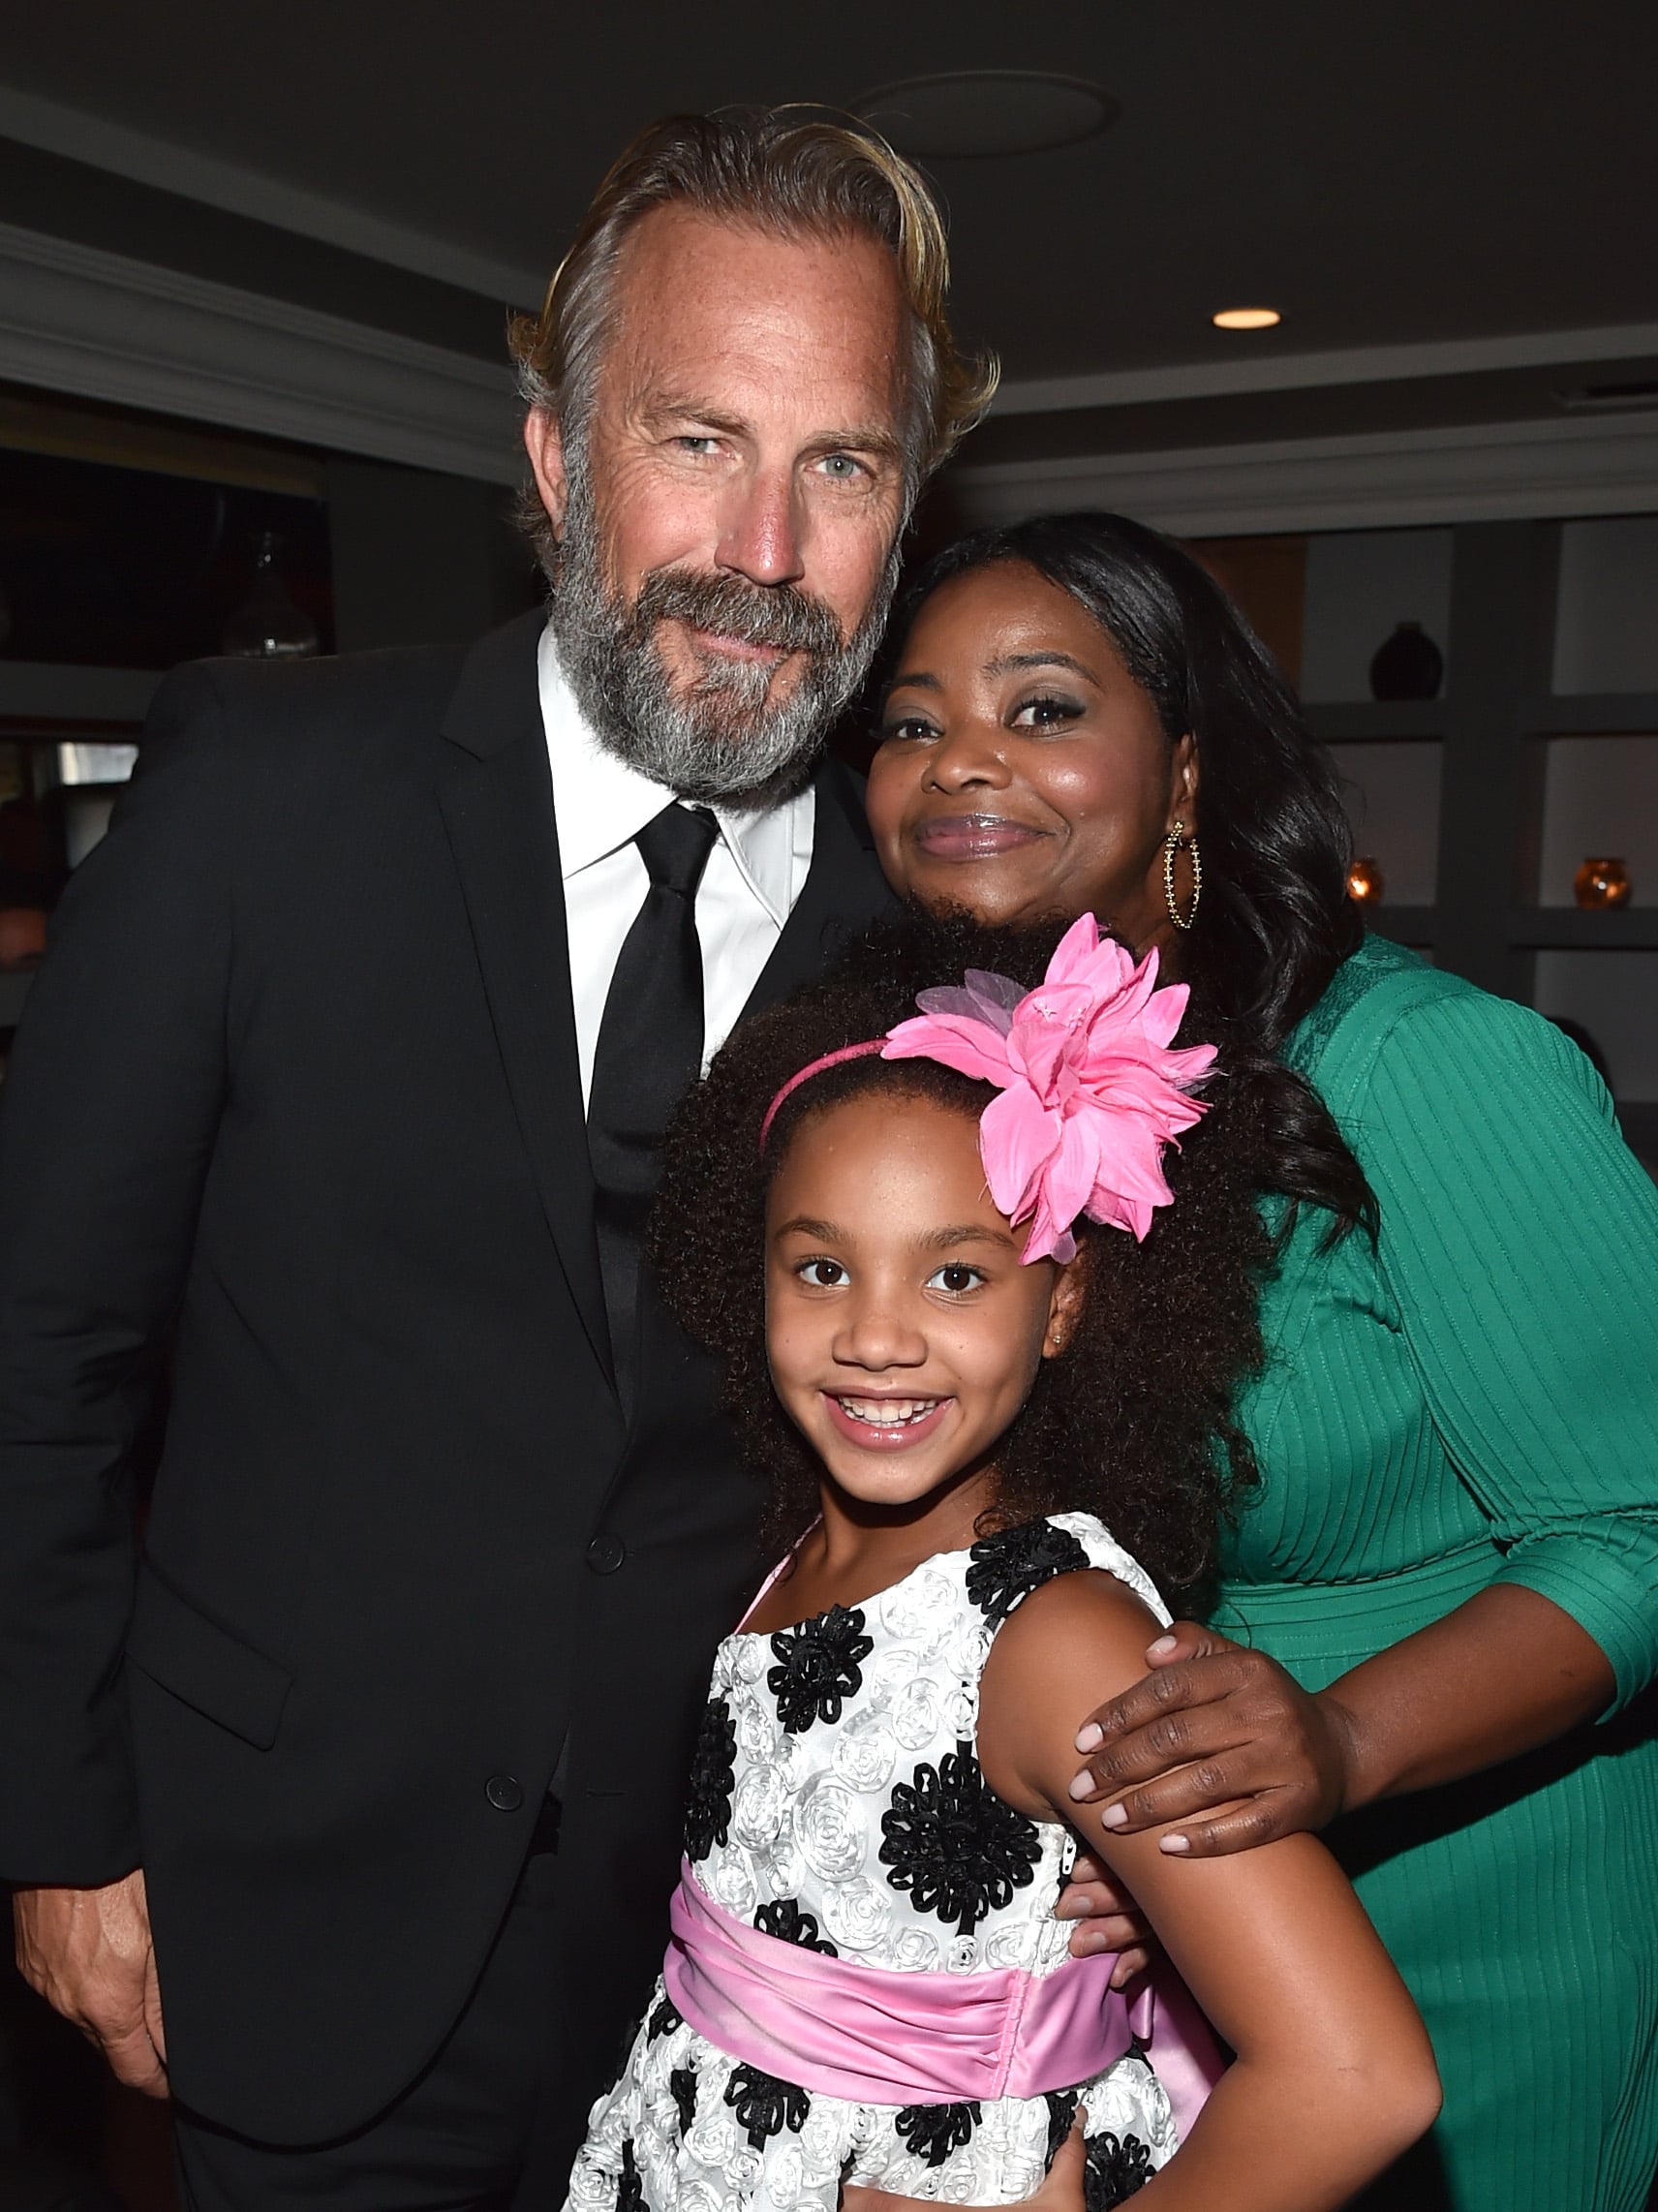 who is kevin costner dating in 2020